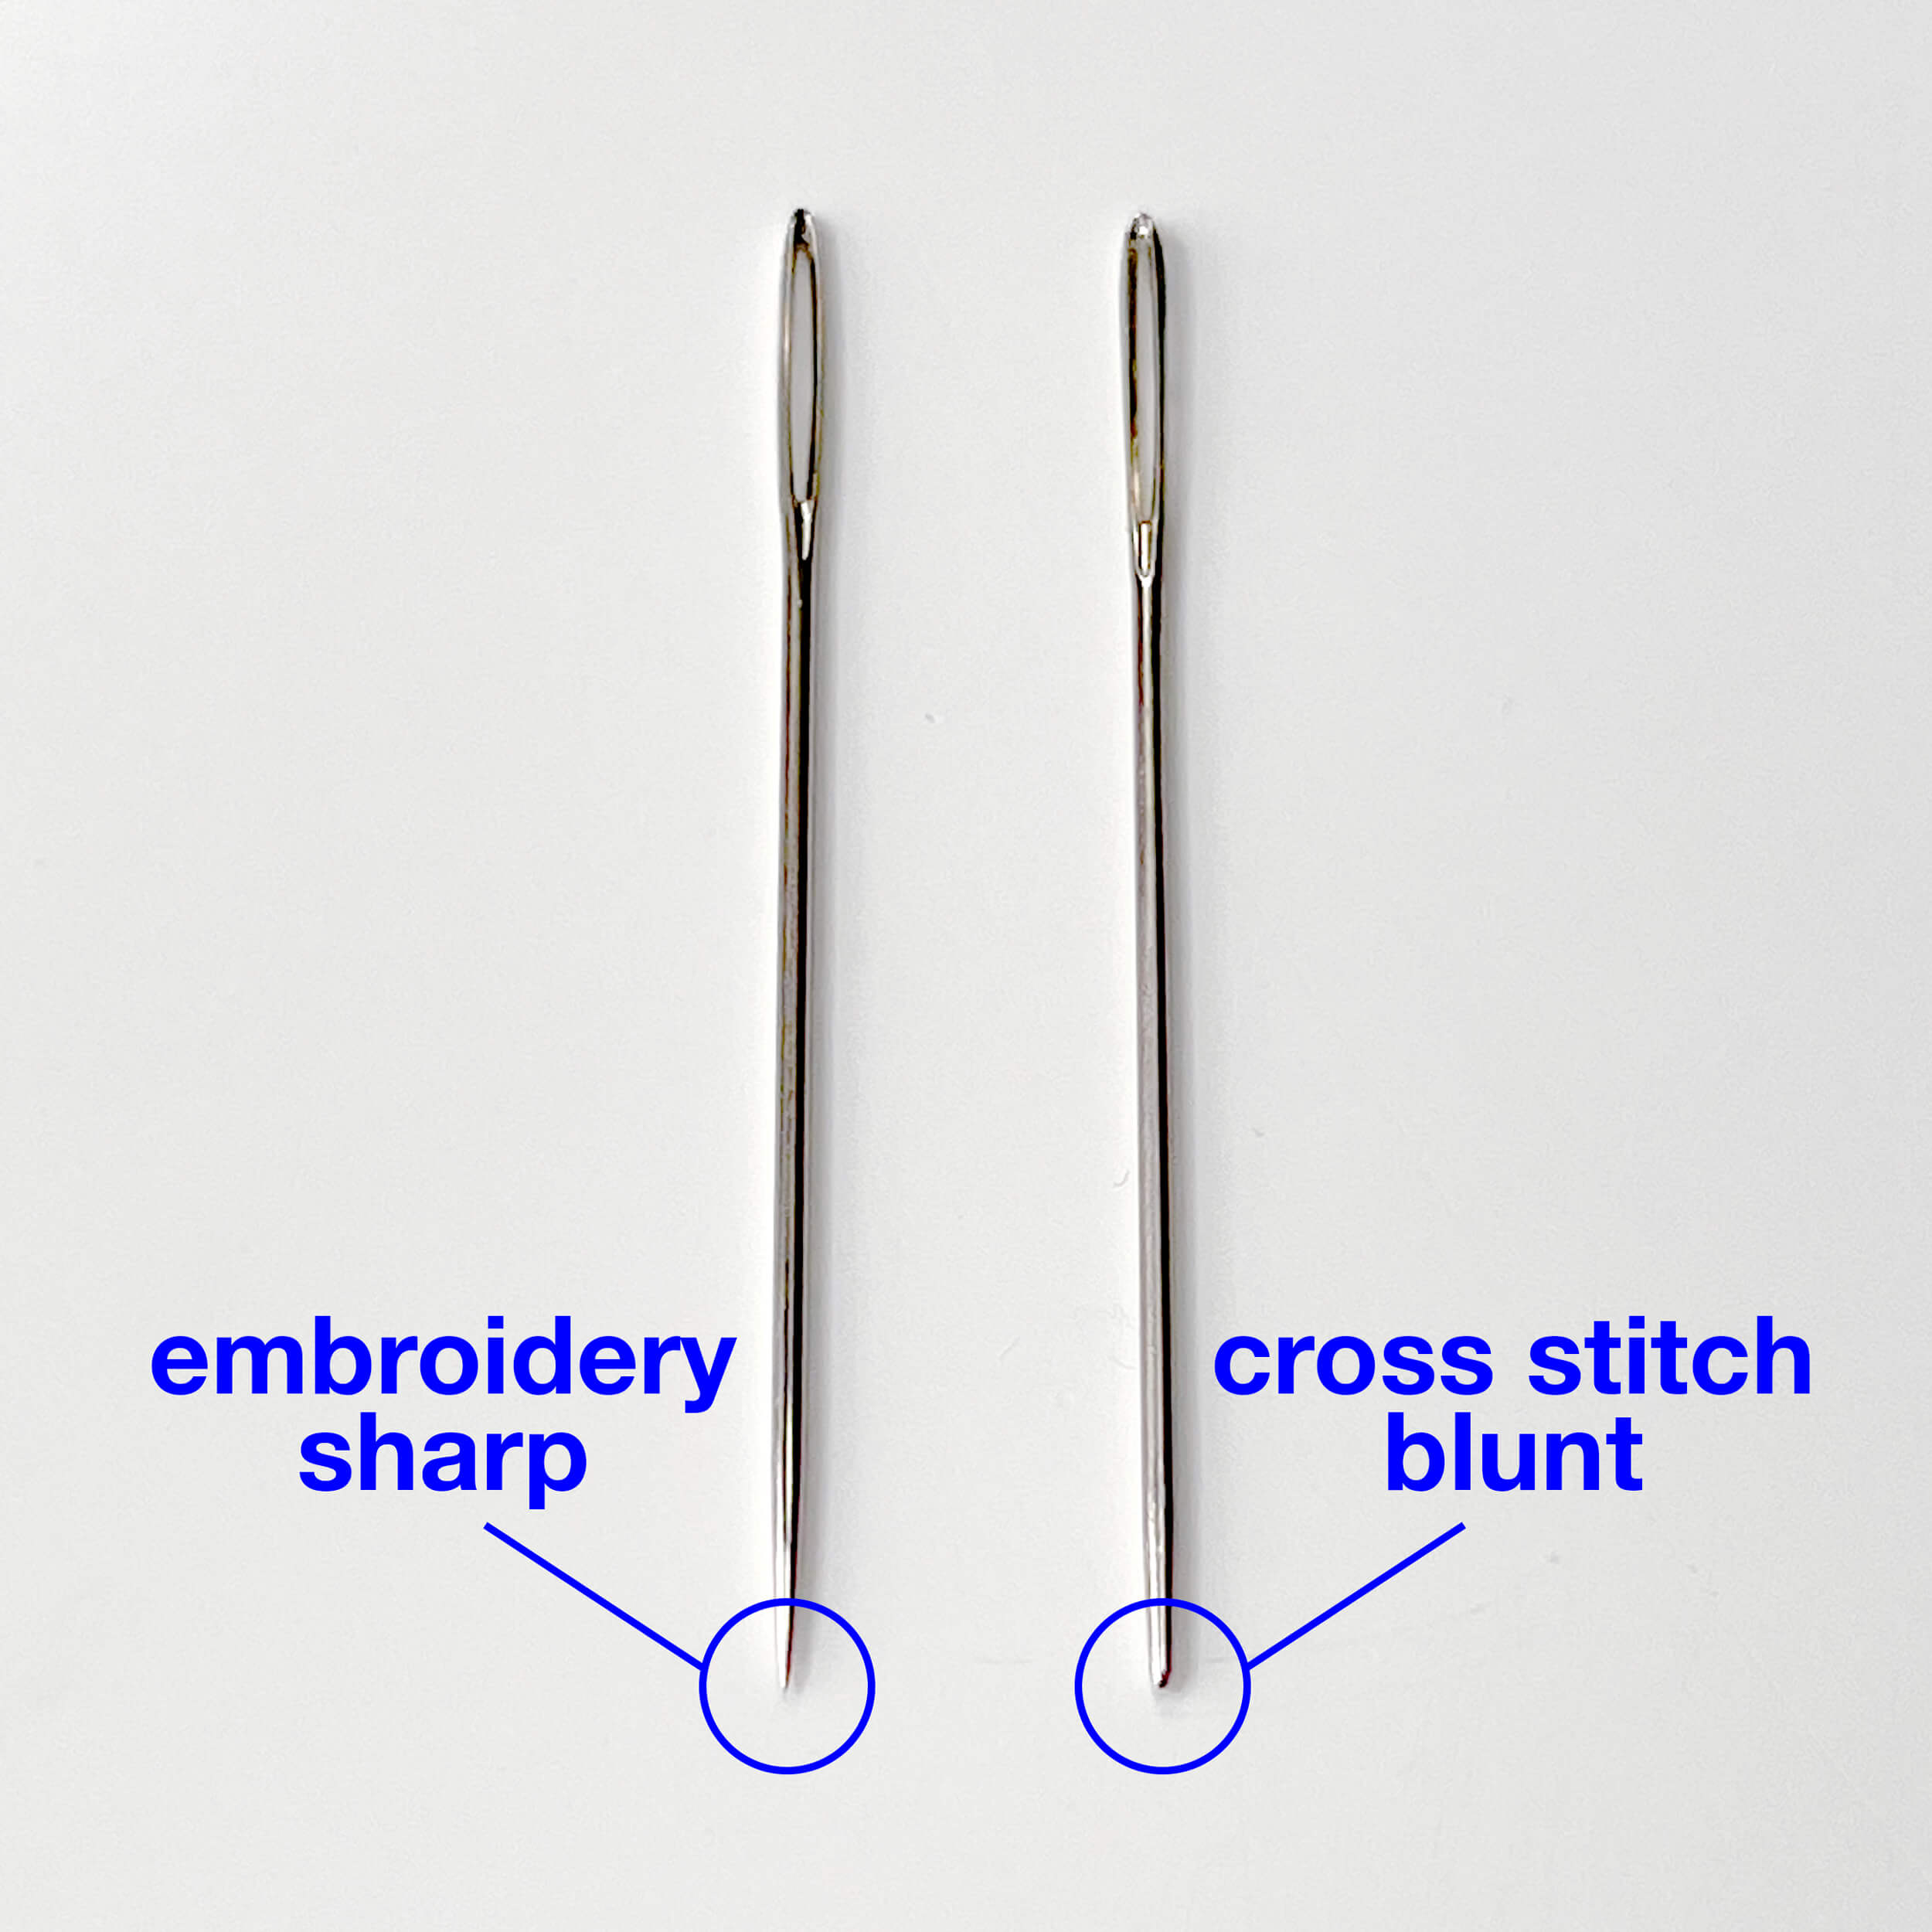 embroidery and cross stitch needle comparison